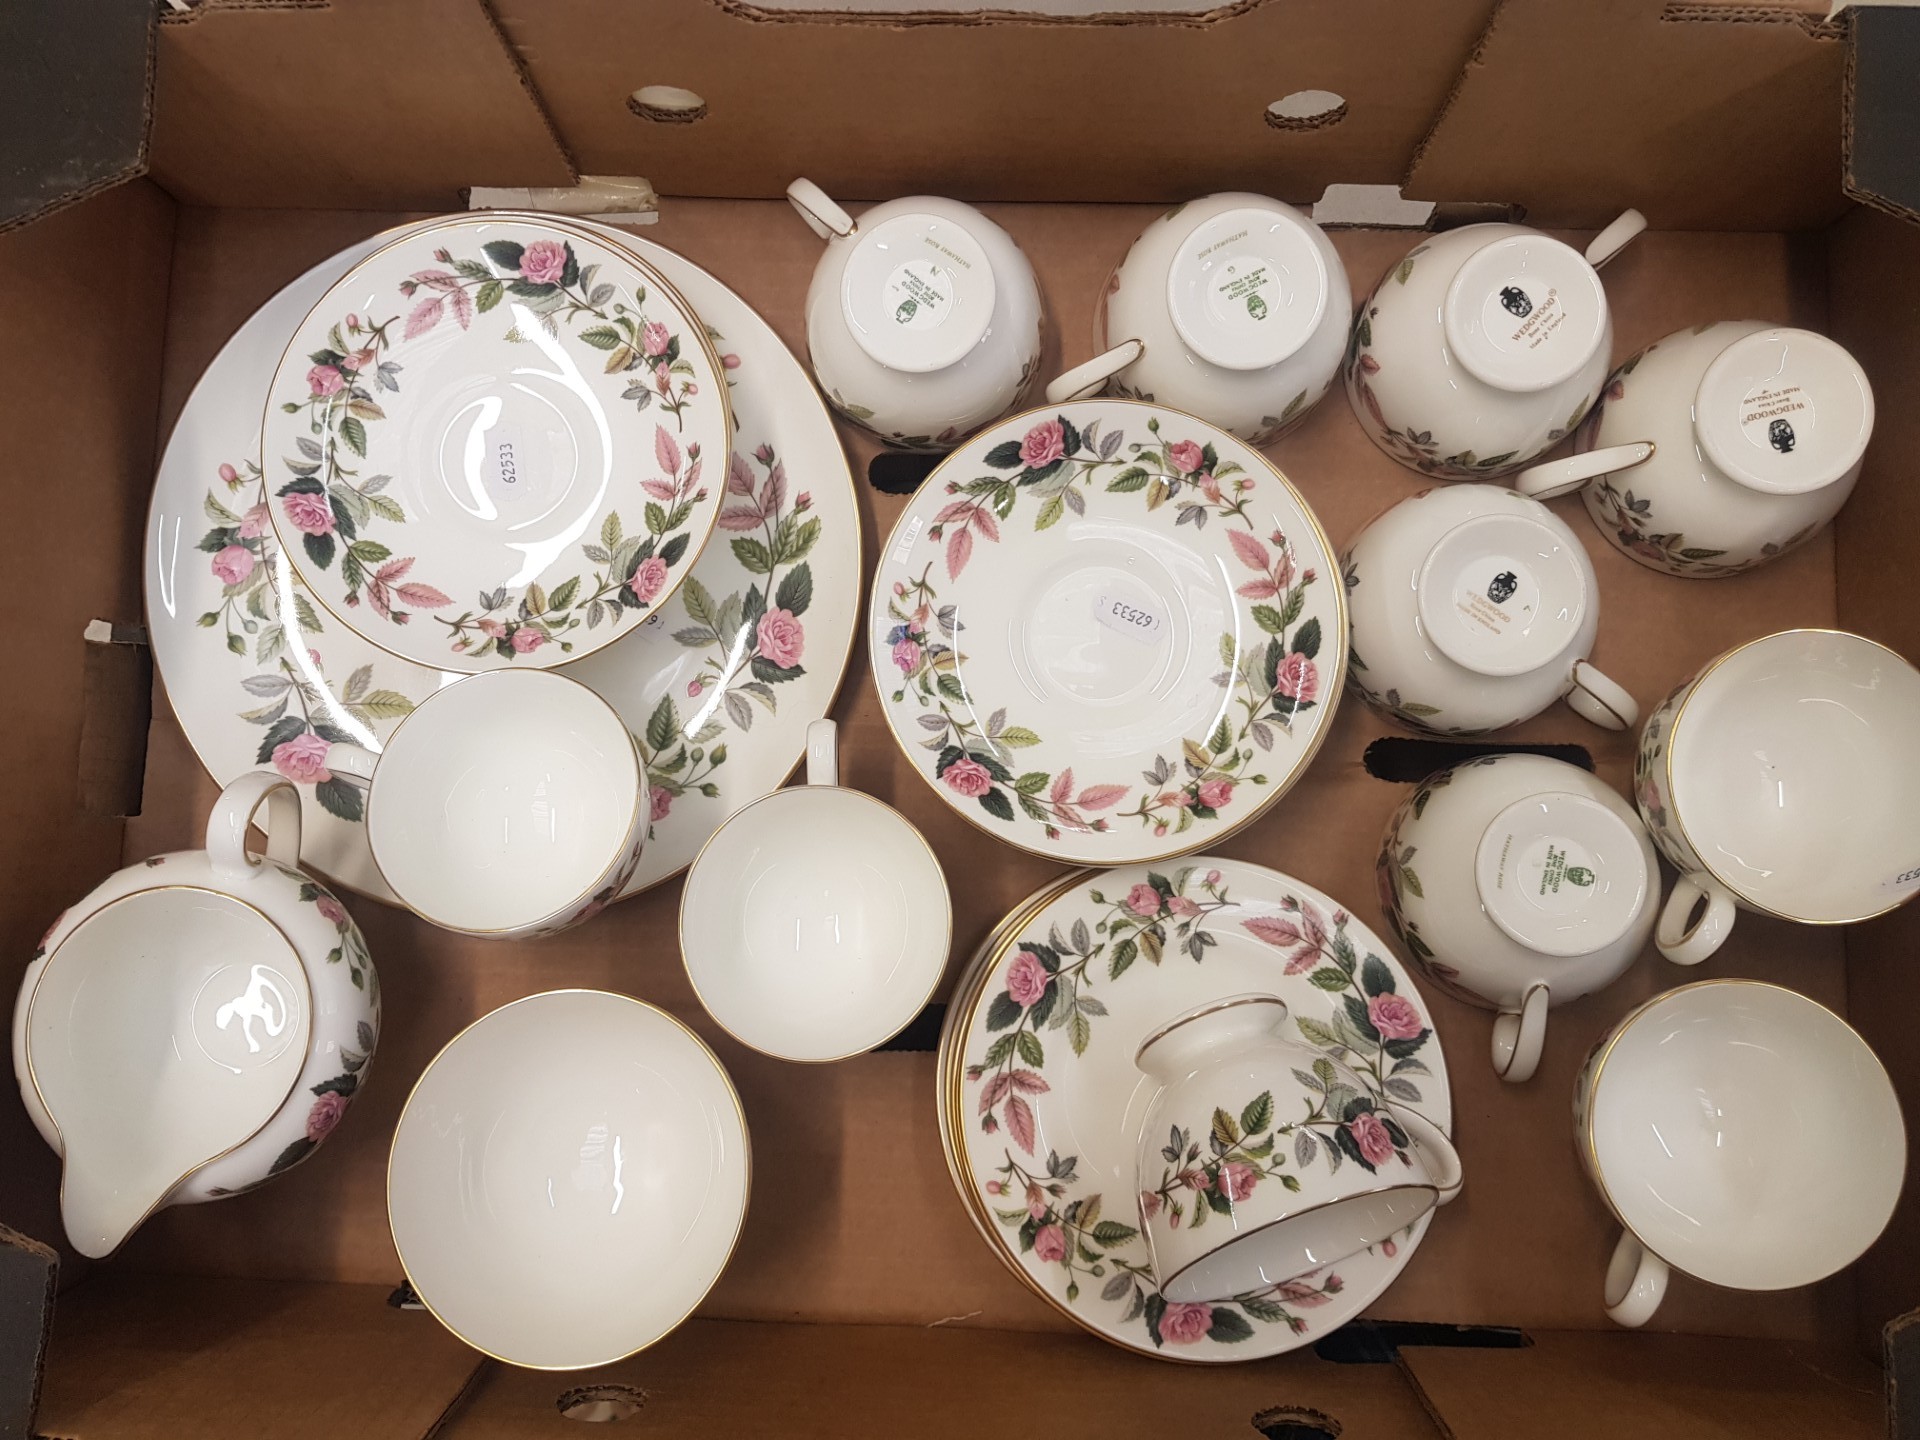 Wedgwood Hathaway Rose pattern tea set consisting of 11 tea cups, 12 saucers, 6 side plates, cake